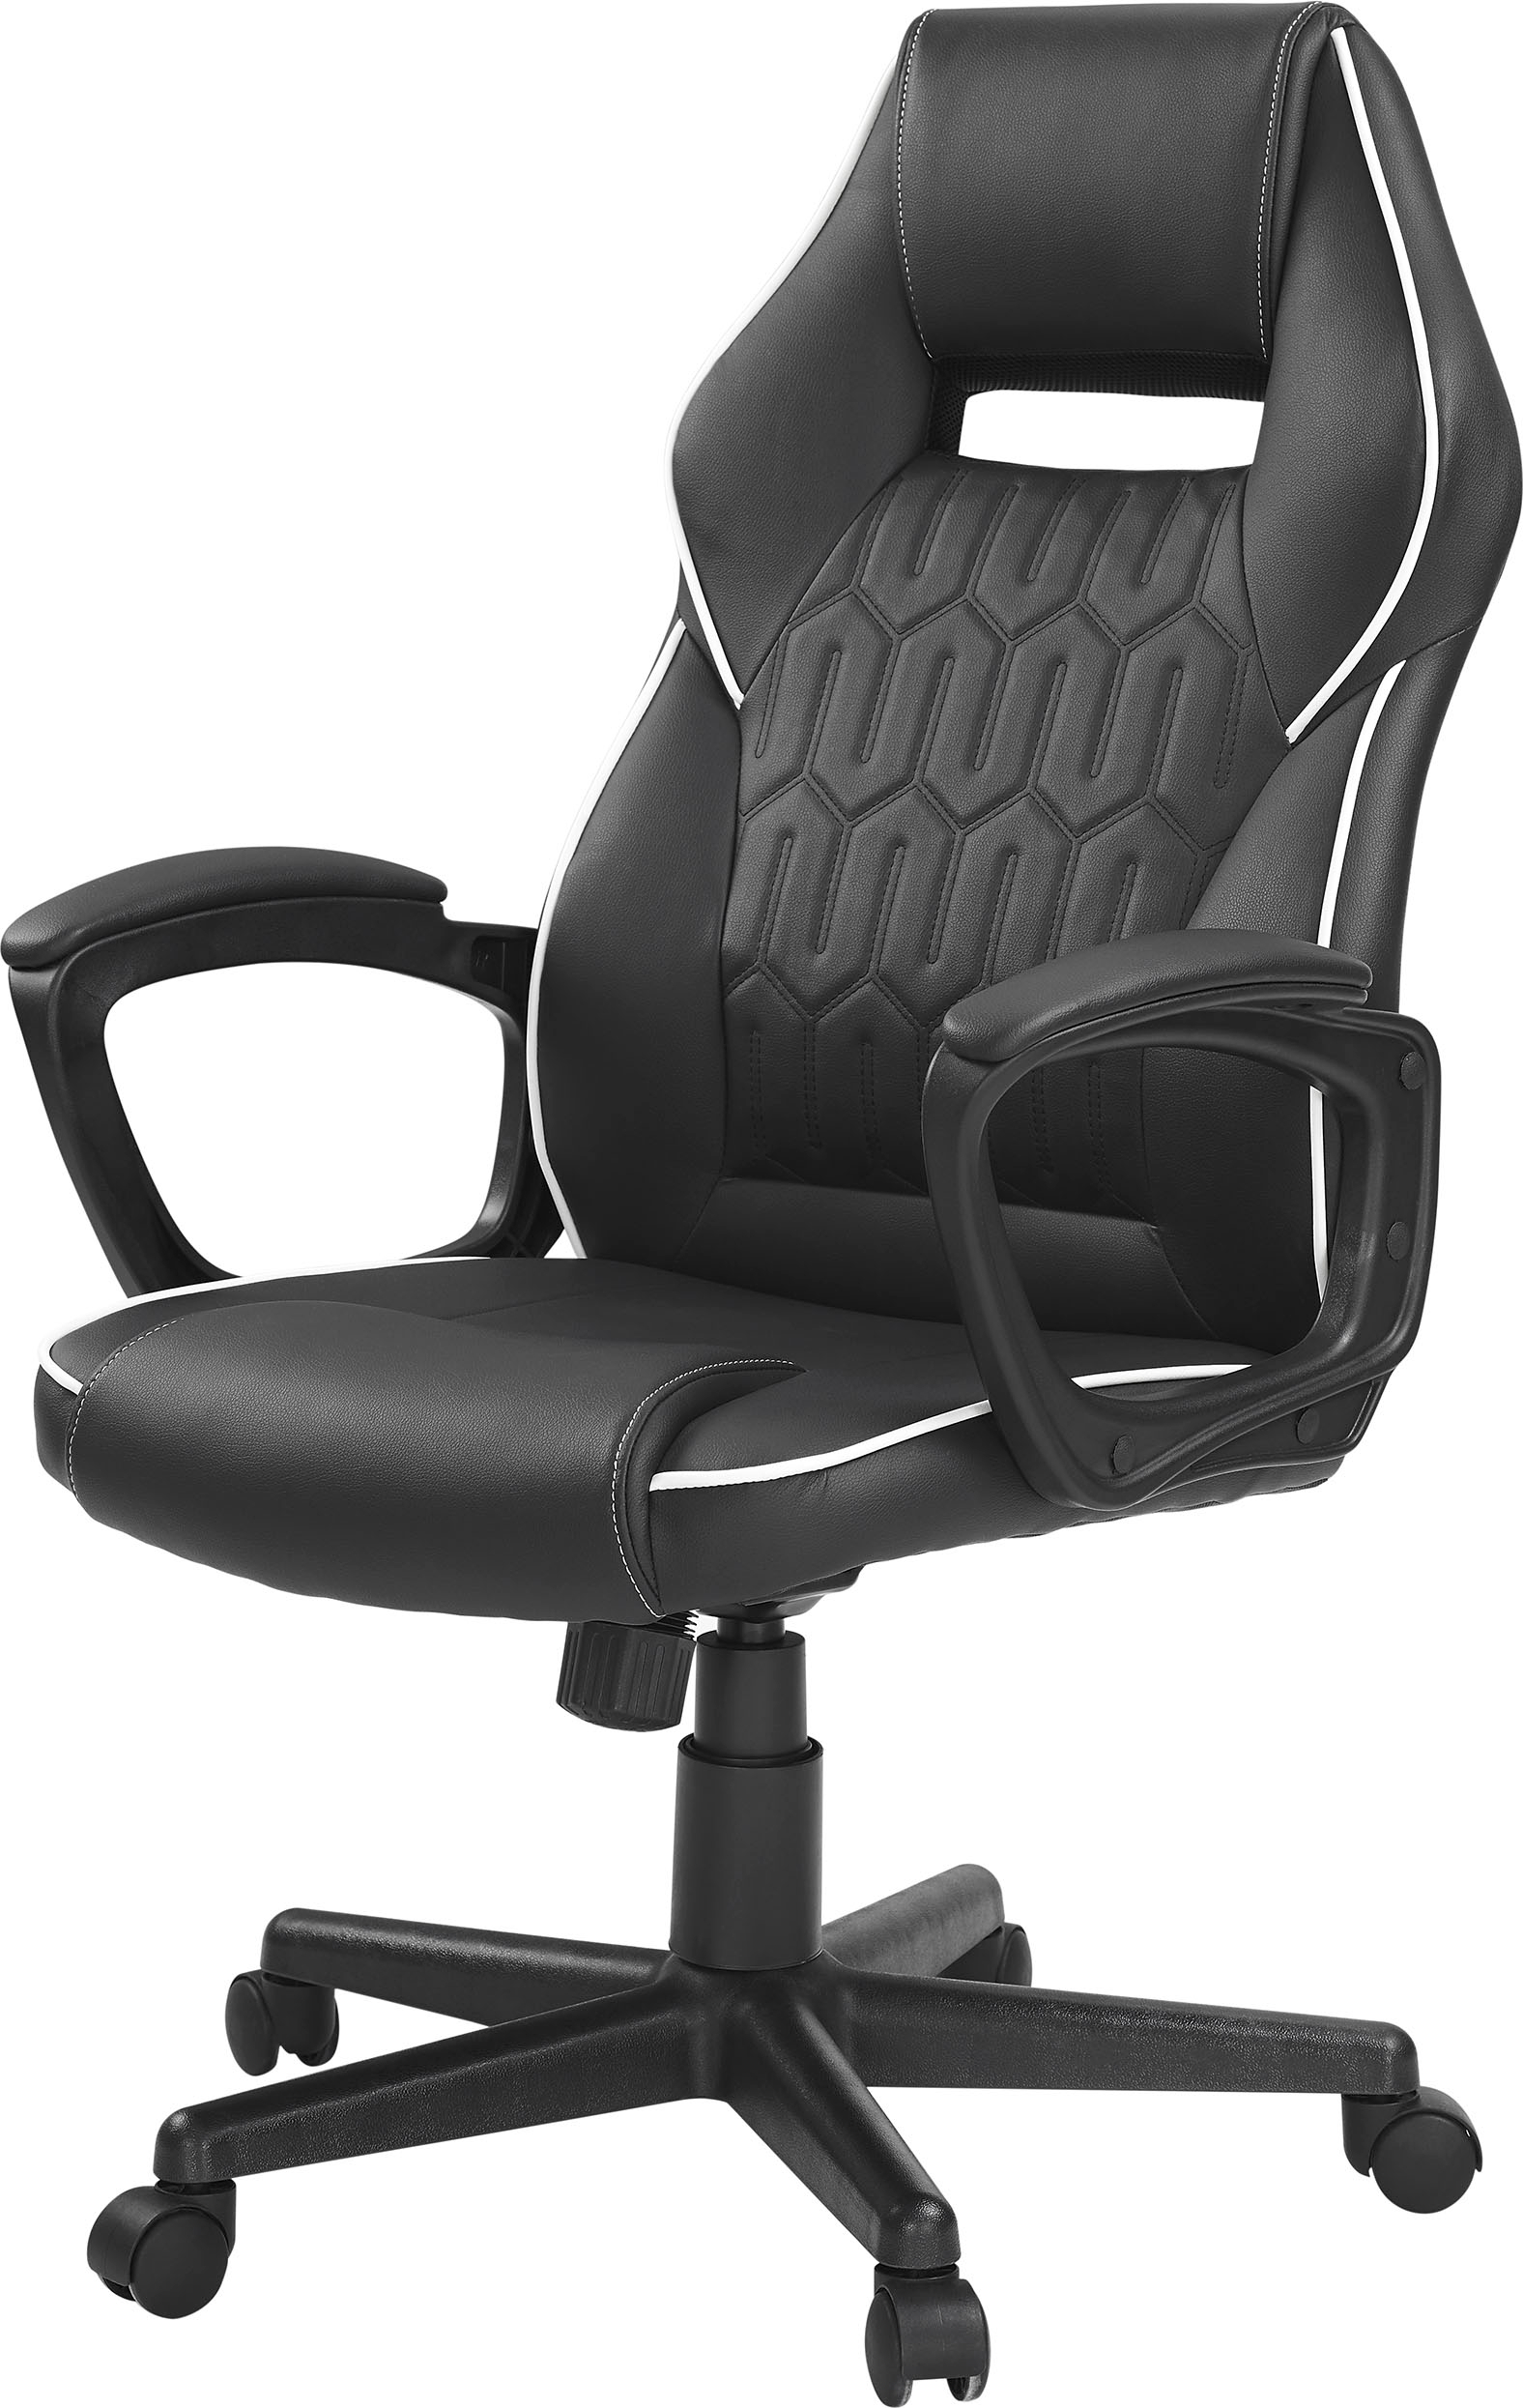 Angle View: Insignia™ - Essential PC Gaming Chair - Black